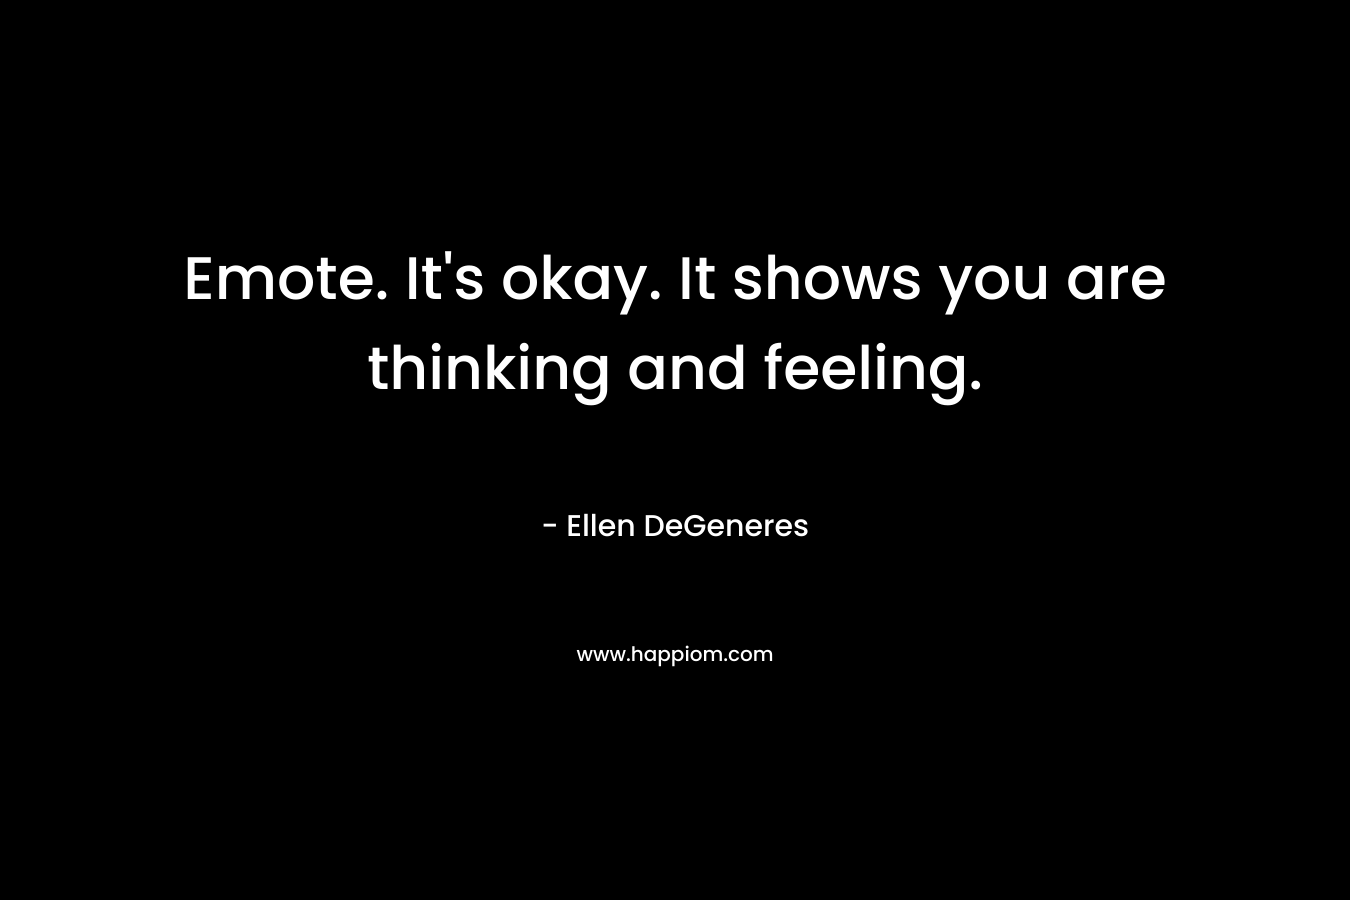 Emote. It’s okay. It shows you are thinking and feeling. – Ellen DeGeneres